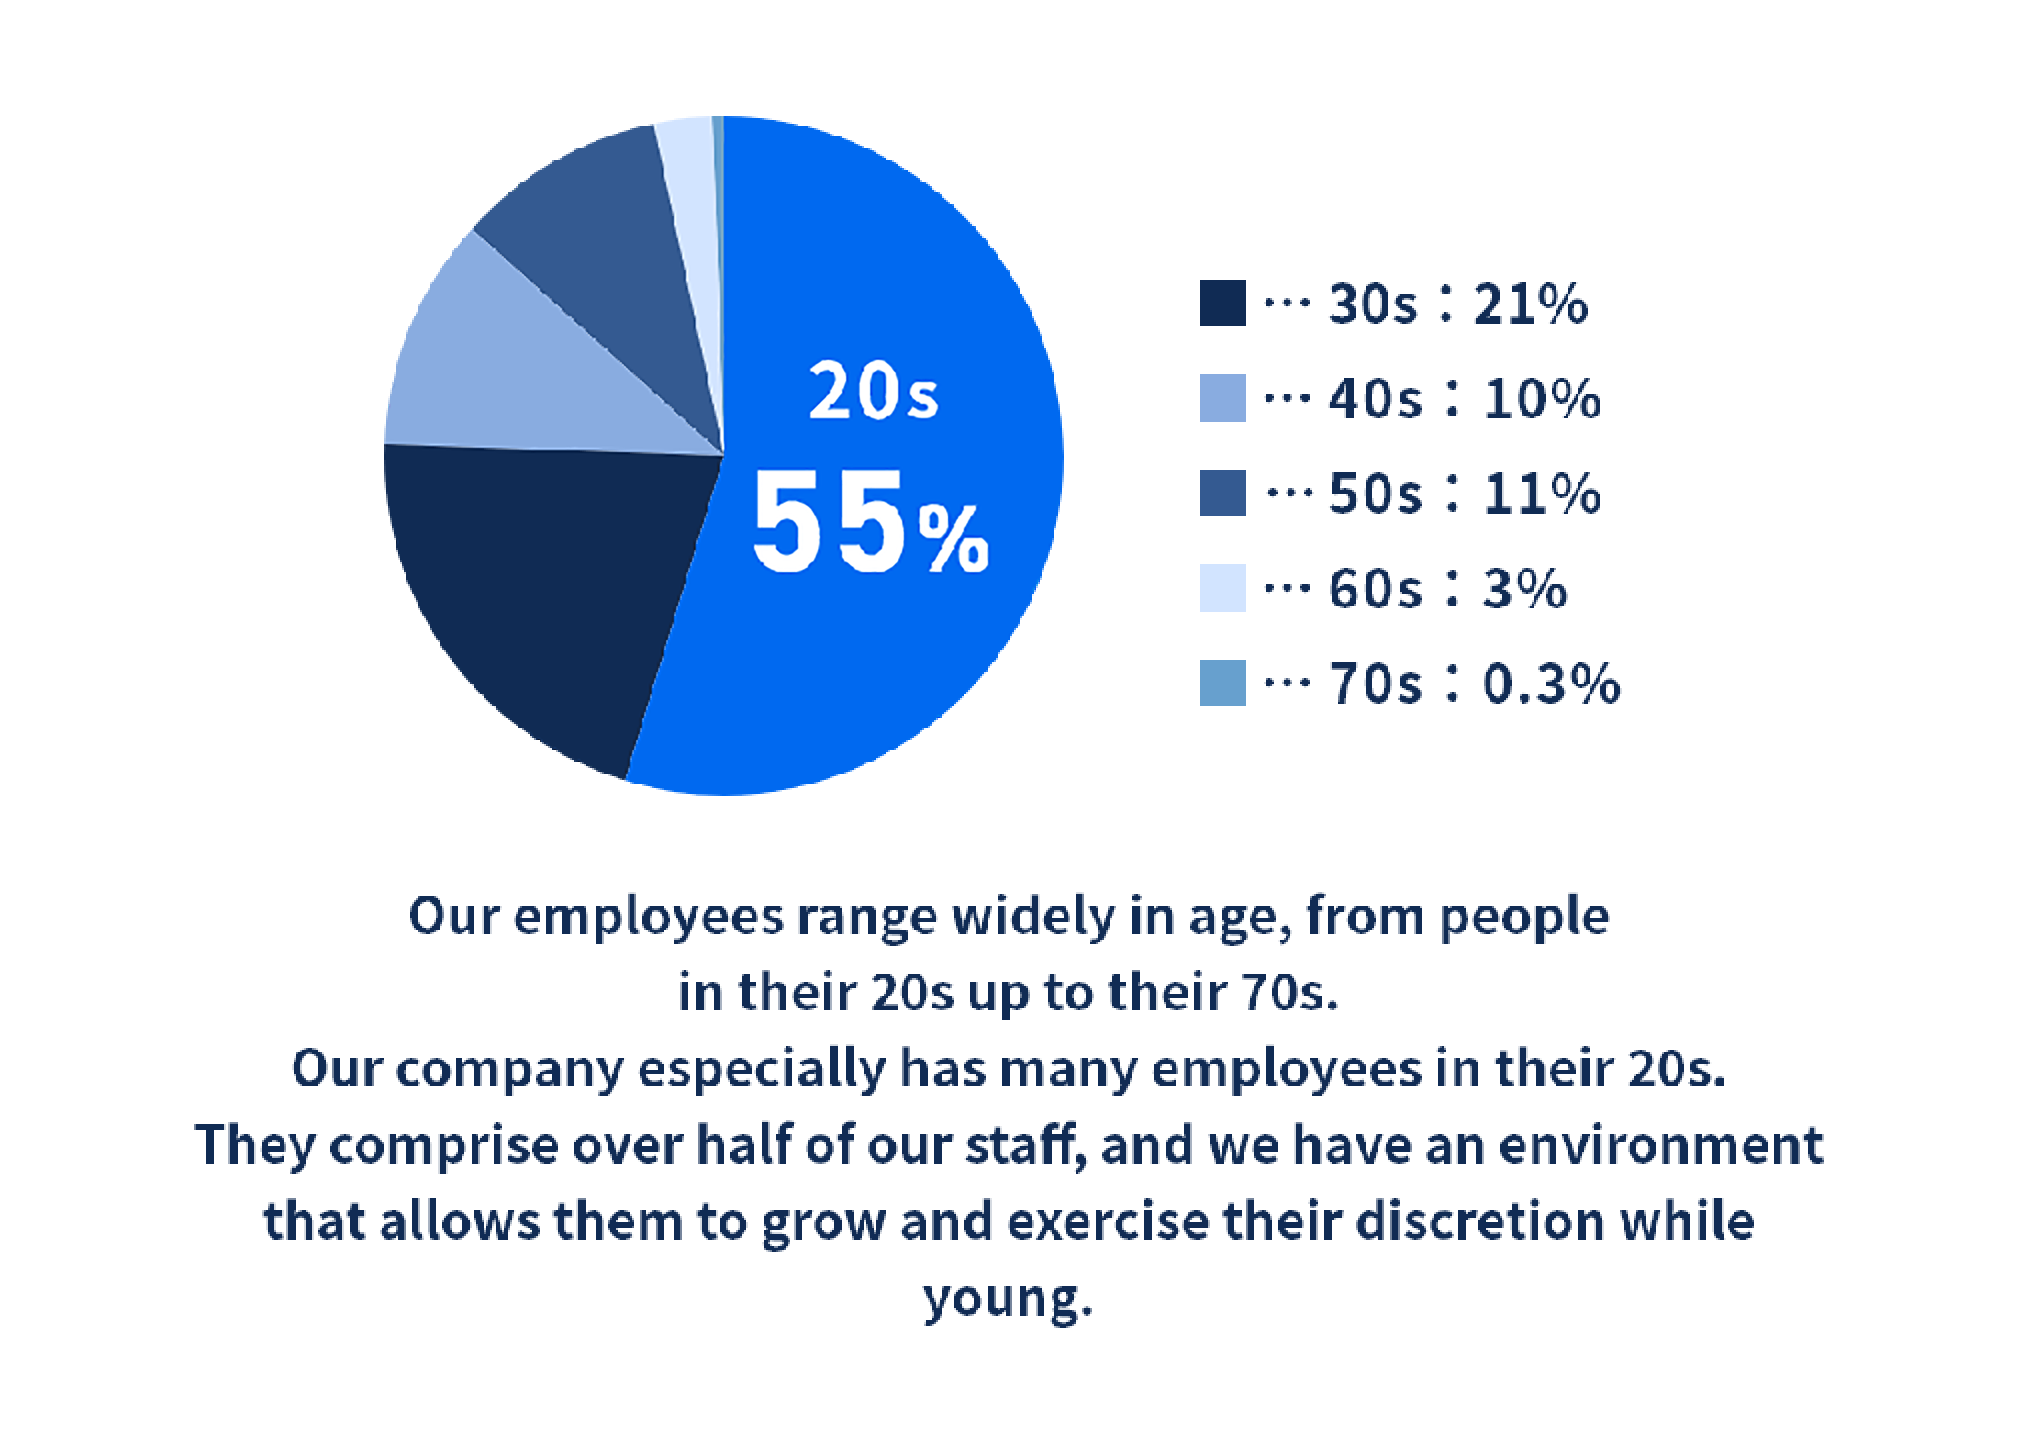 Our employees range widely in age, from people in their 20s up to their 70s.
Our company especially has many employees in their 20s.
They comprise over half of our staff, and we have an environment that allows them to grow and exercise their discretion while young.